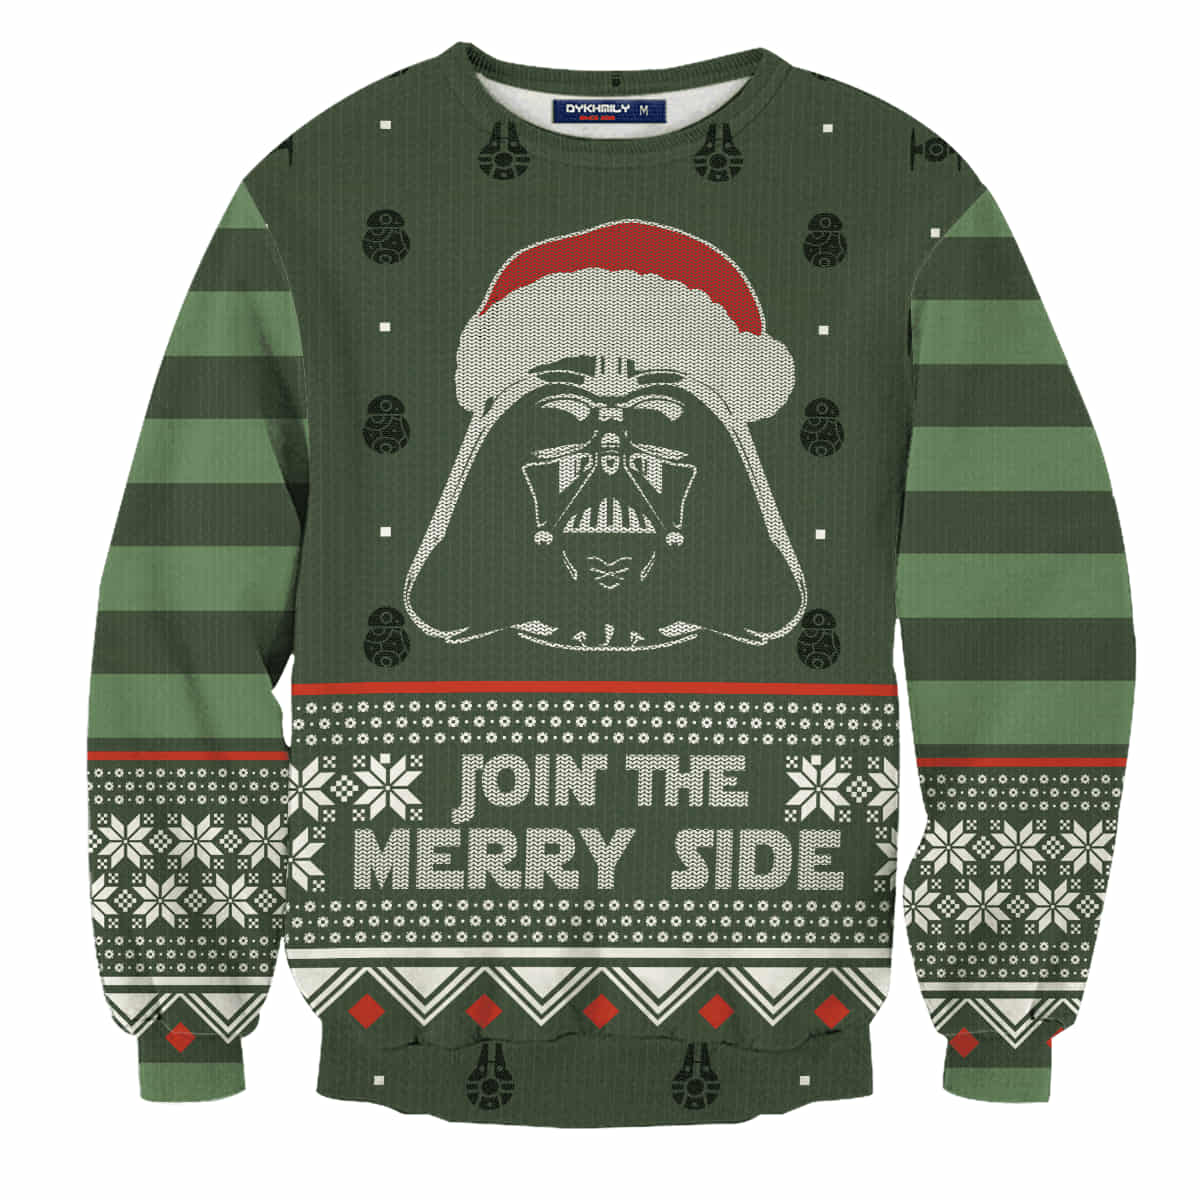 Darth Vader 3D Sweater, Join The Merry Side Wool Knitted Sweater